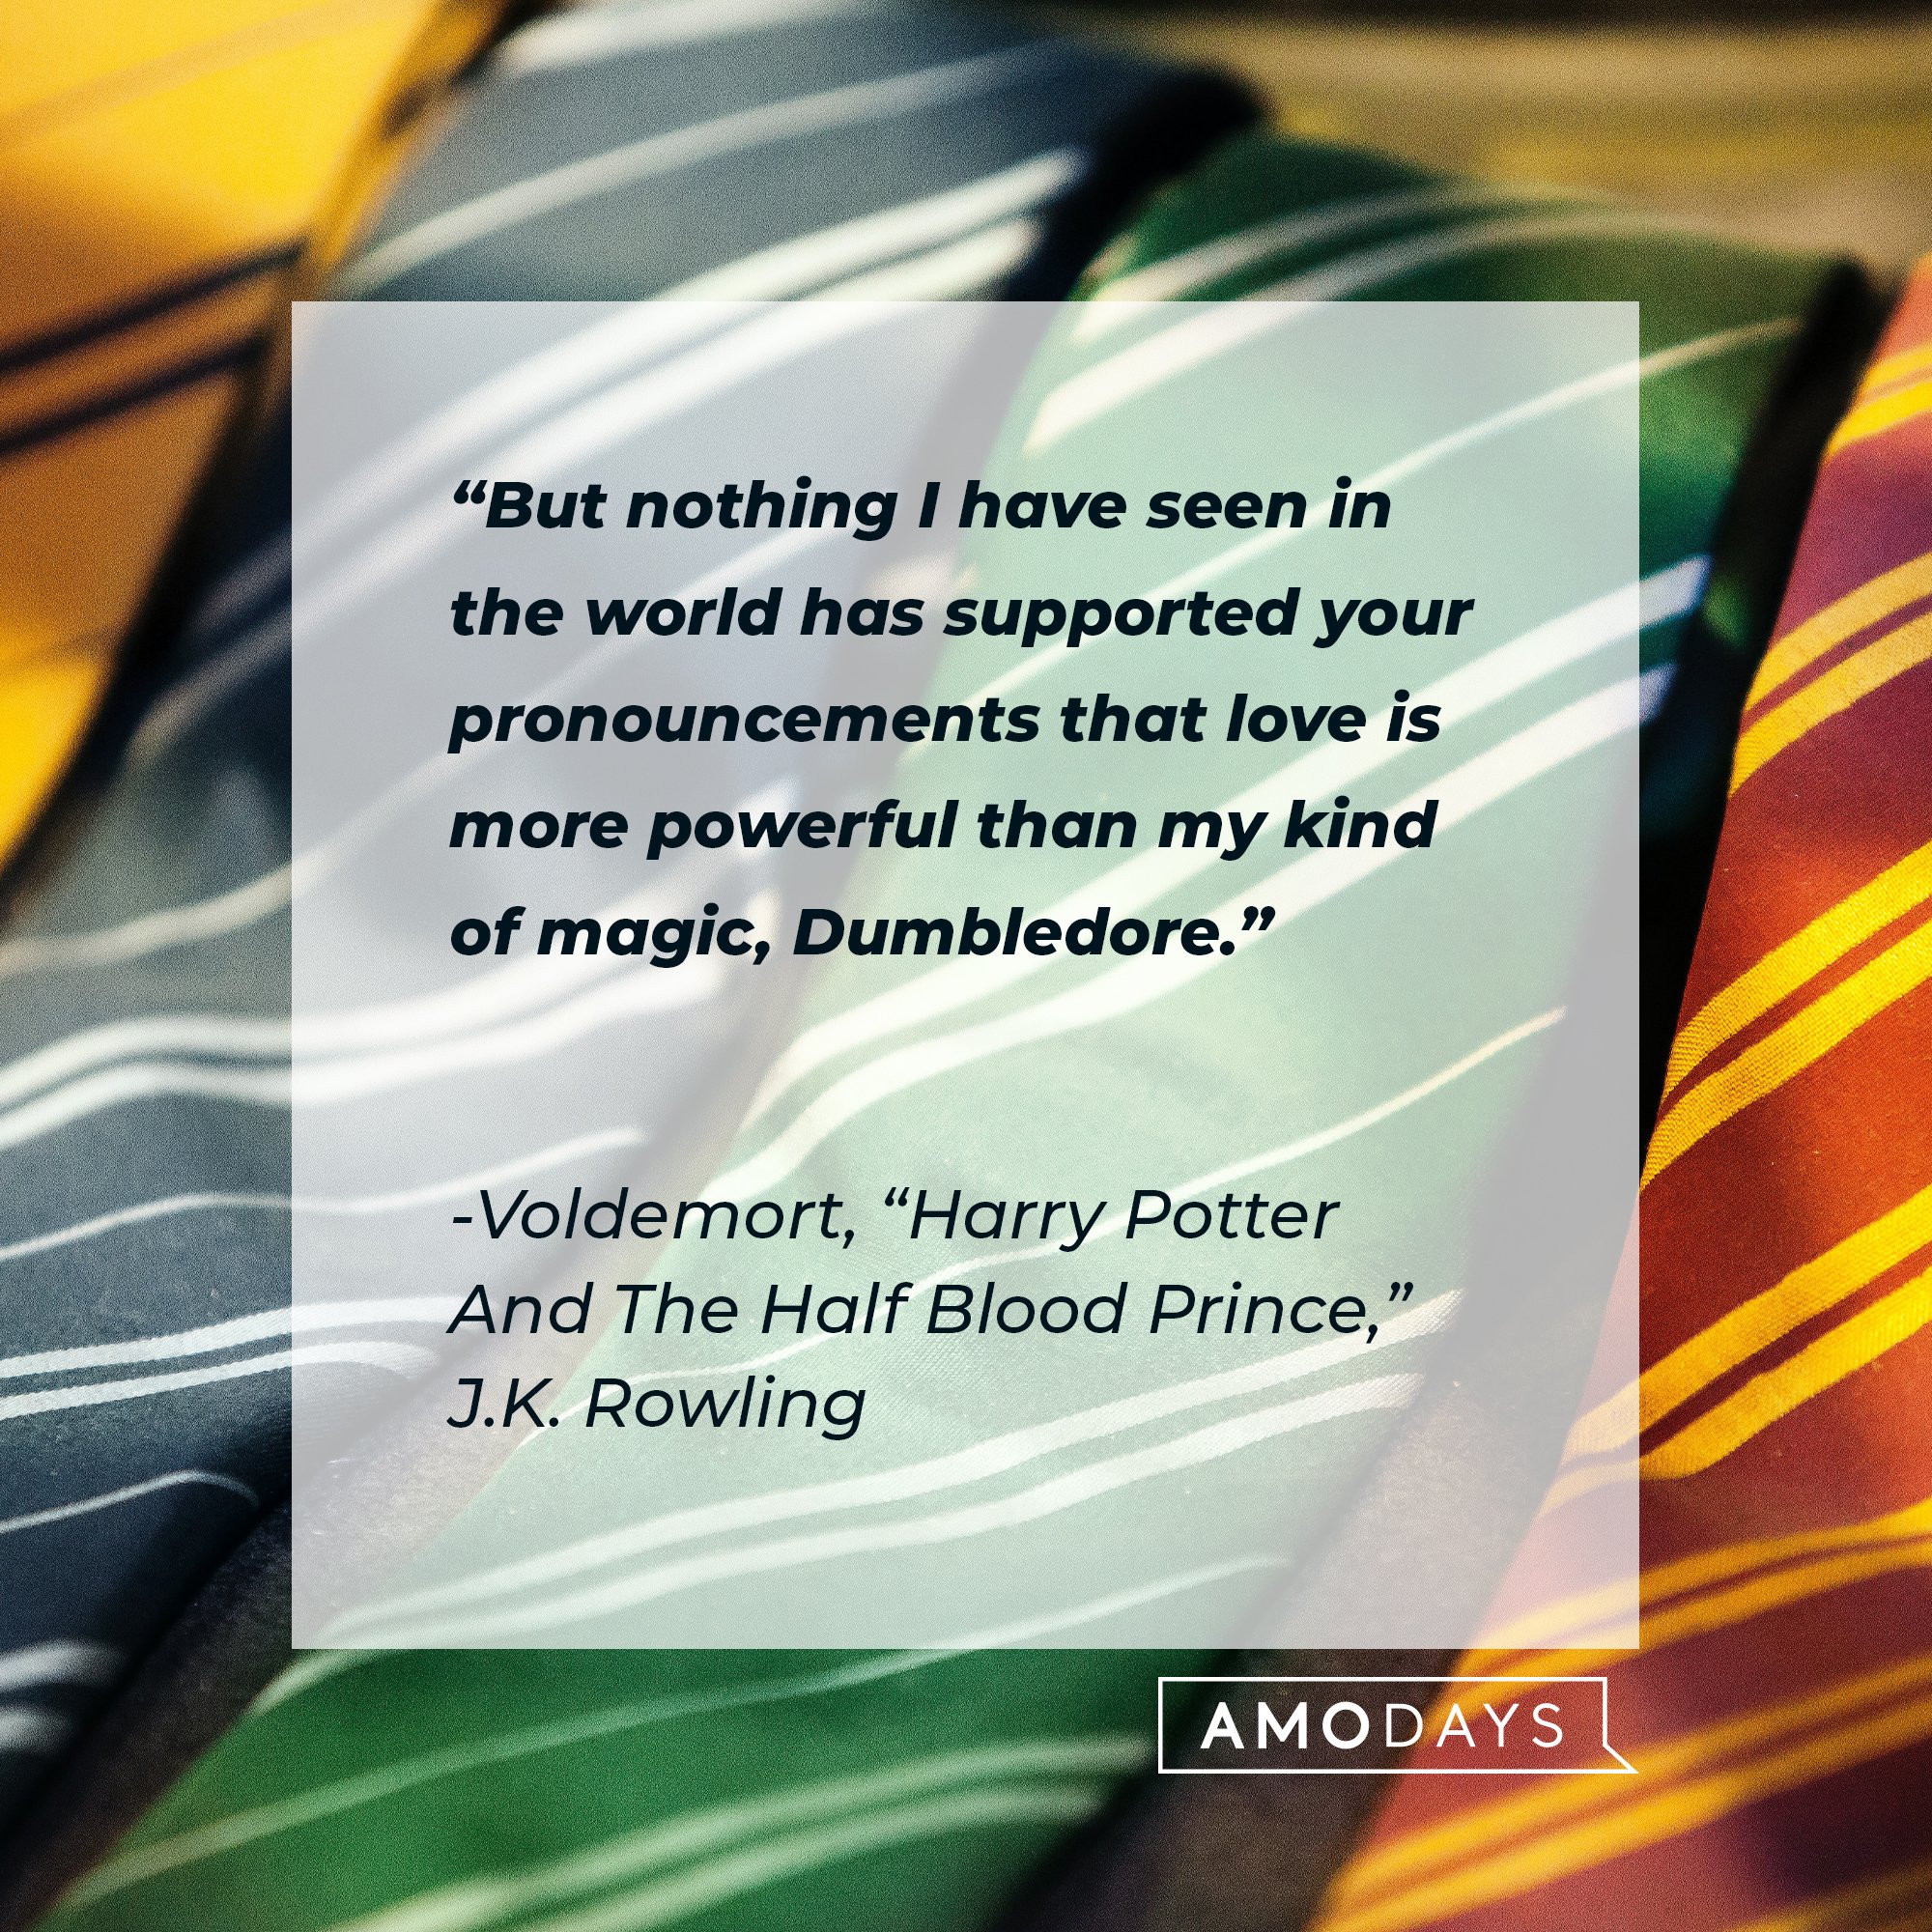 Voldemort's quote from the “Harry Potter and the Half Blood Prince”: "But nothing I have seen in the world has supported your pronouncements that love is more powerful than my kind of magic, Dumbledore." | Image: AmoDays